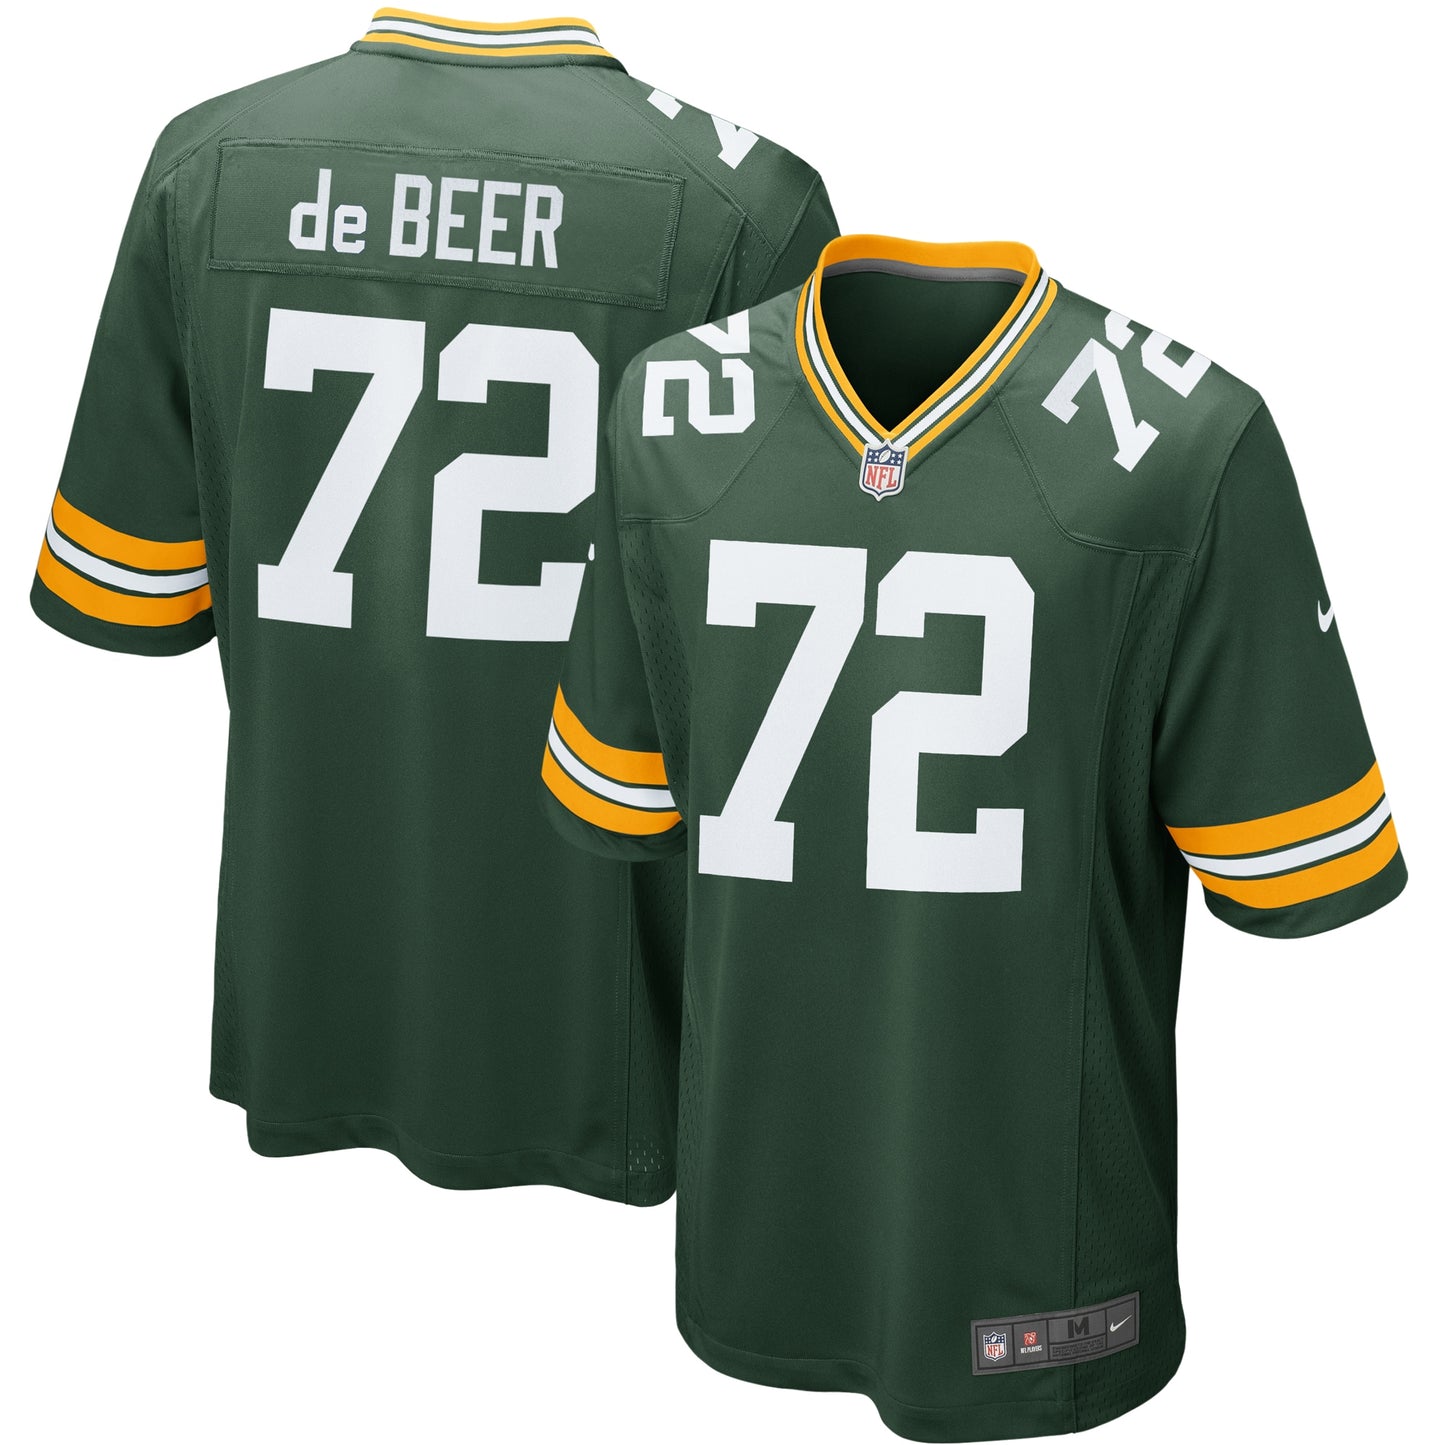 Gerhard de Beer Green Bay Packers Nike Youth Game Jersey - Green